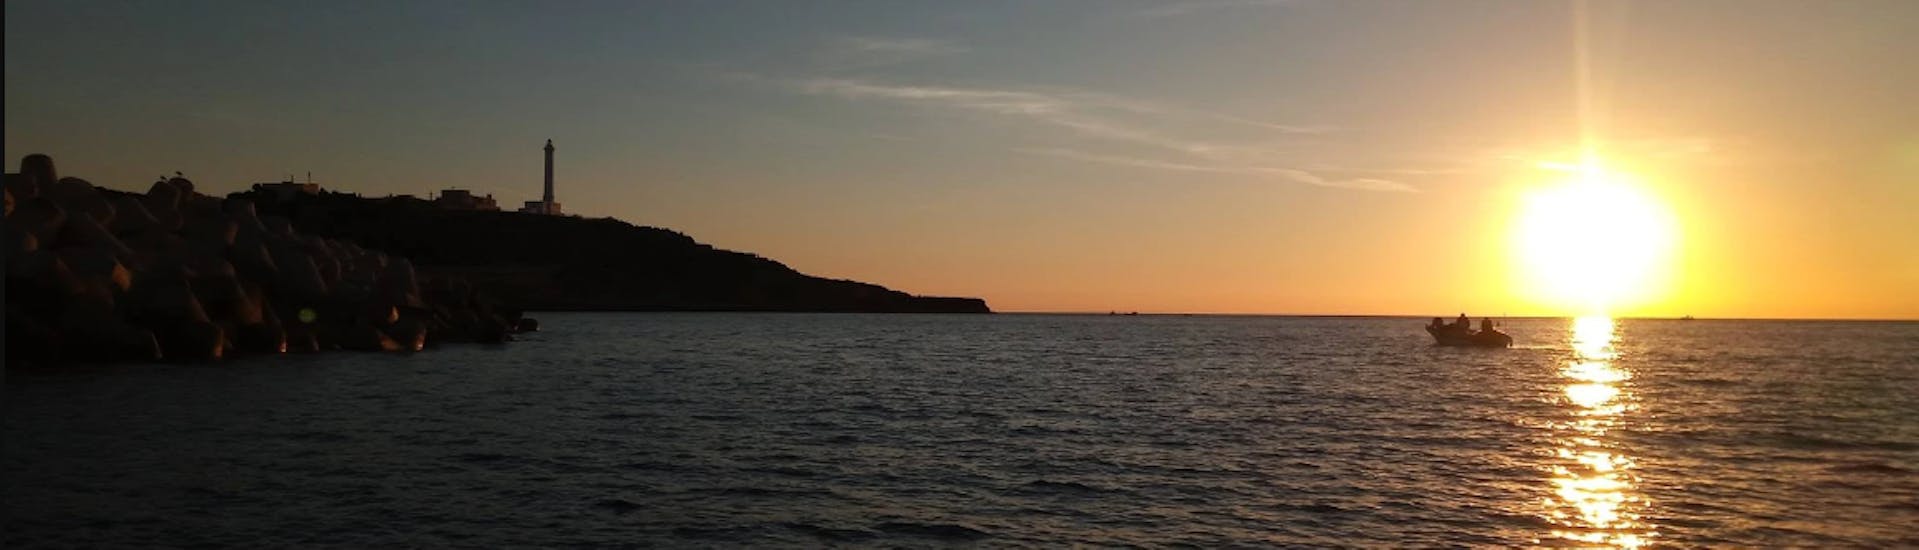 Picture of the view of the bay in front of the Leuca lighthouse at sunset from a boat from Leucos Escursioni Leuca during the Boat Trip from Santa Maria di Leuca to the Sea Caves.